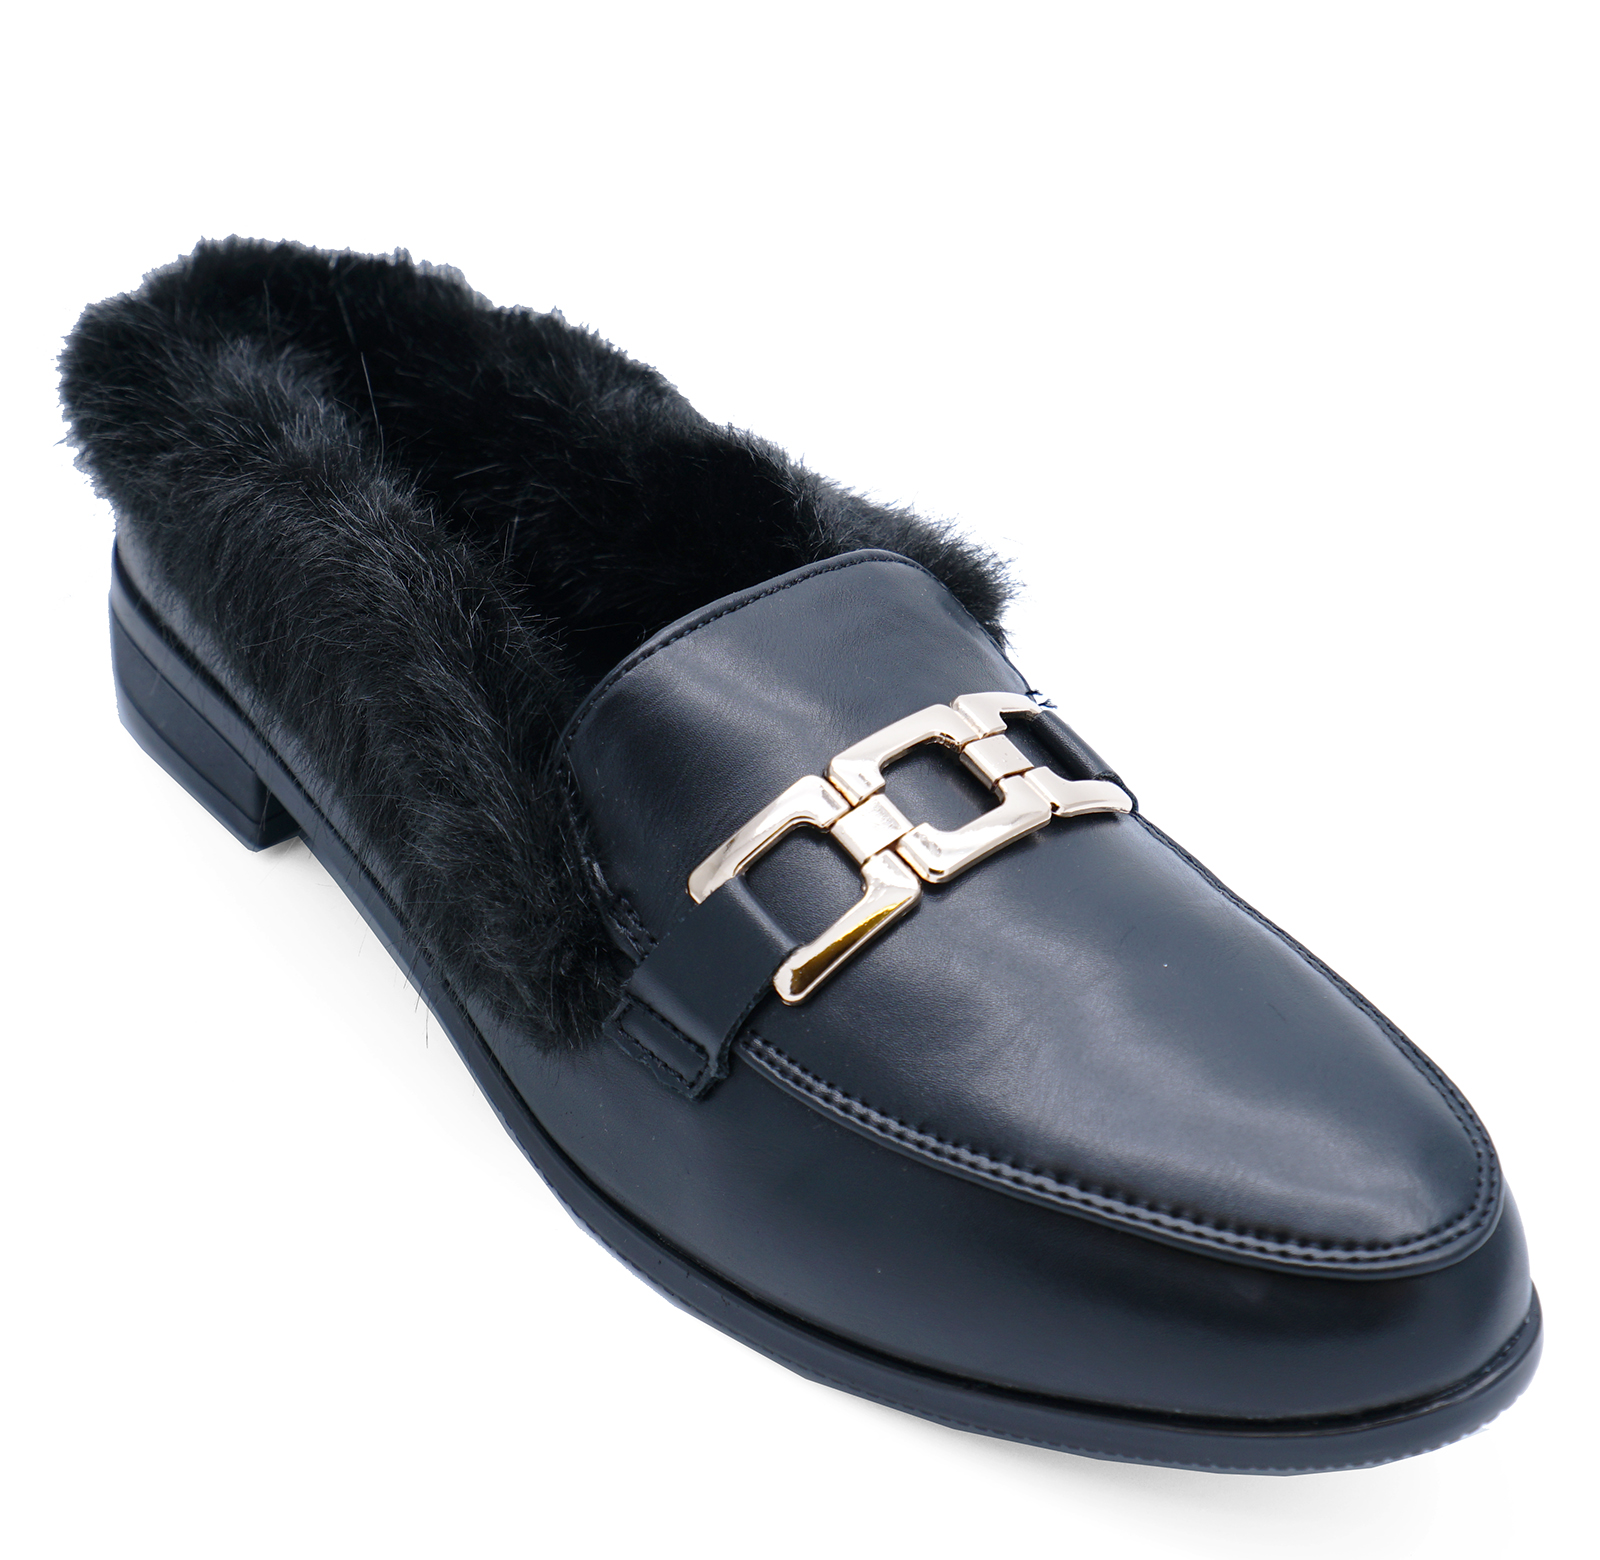 WOMENS FLAT BLACK FUR LINED SLIP-ON SMART MULES LOAFERS SLIDERS SHOES ...